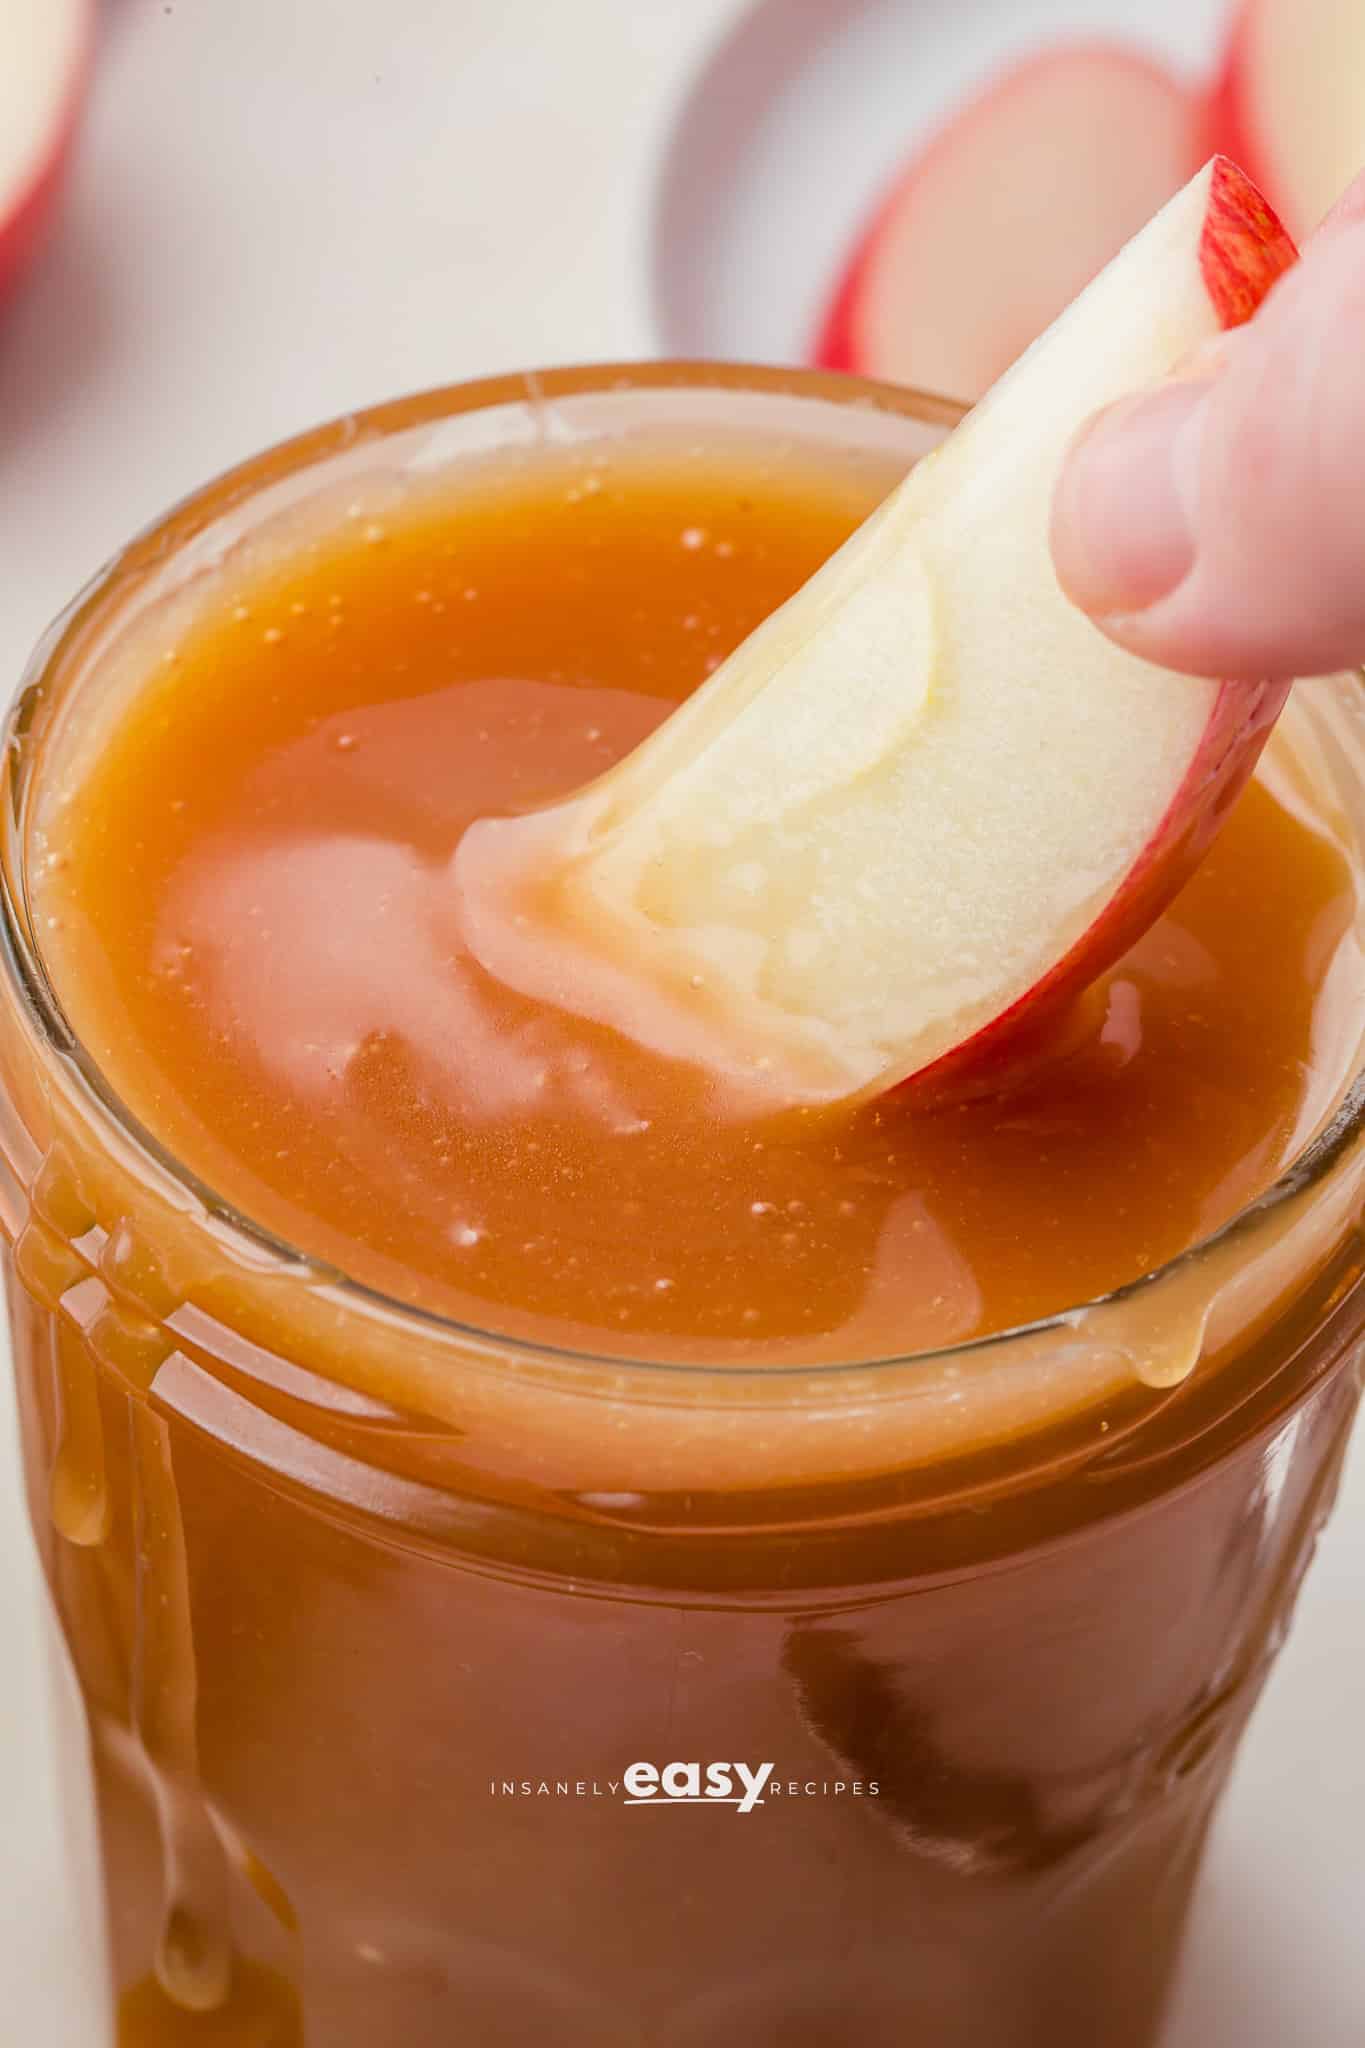 An apple slice dipping into a small glass jar filled with homemade microwave caramel sauce